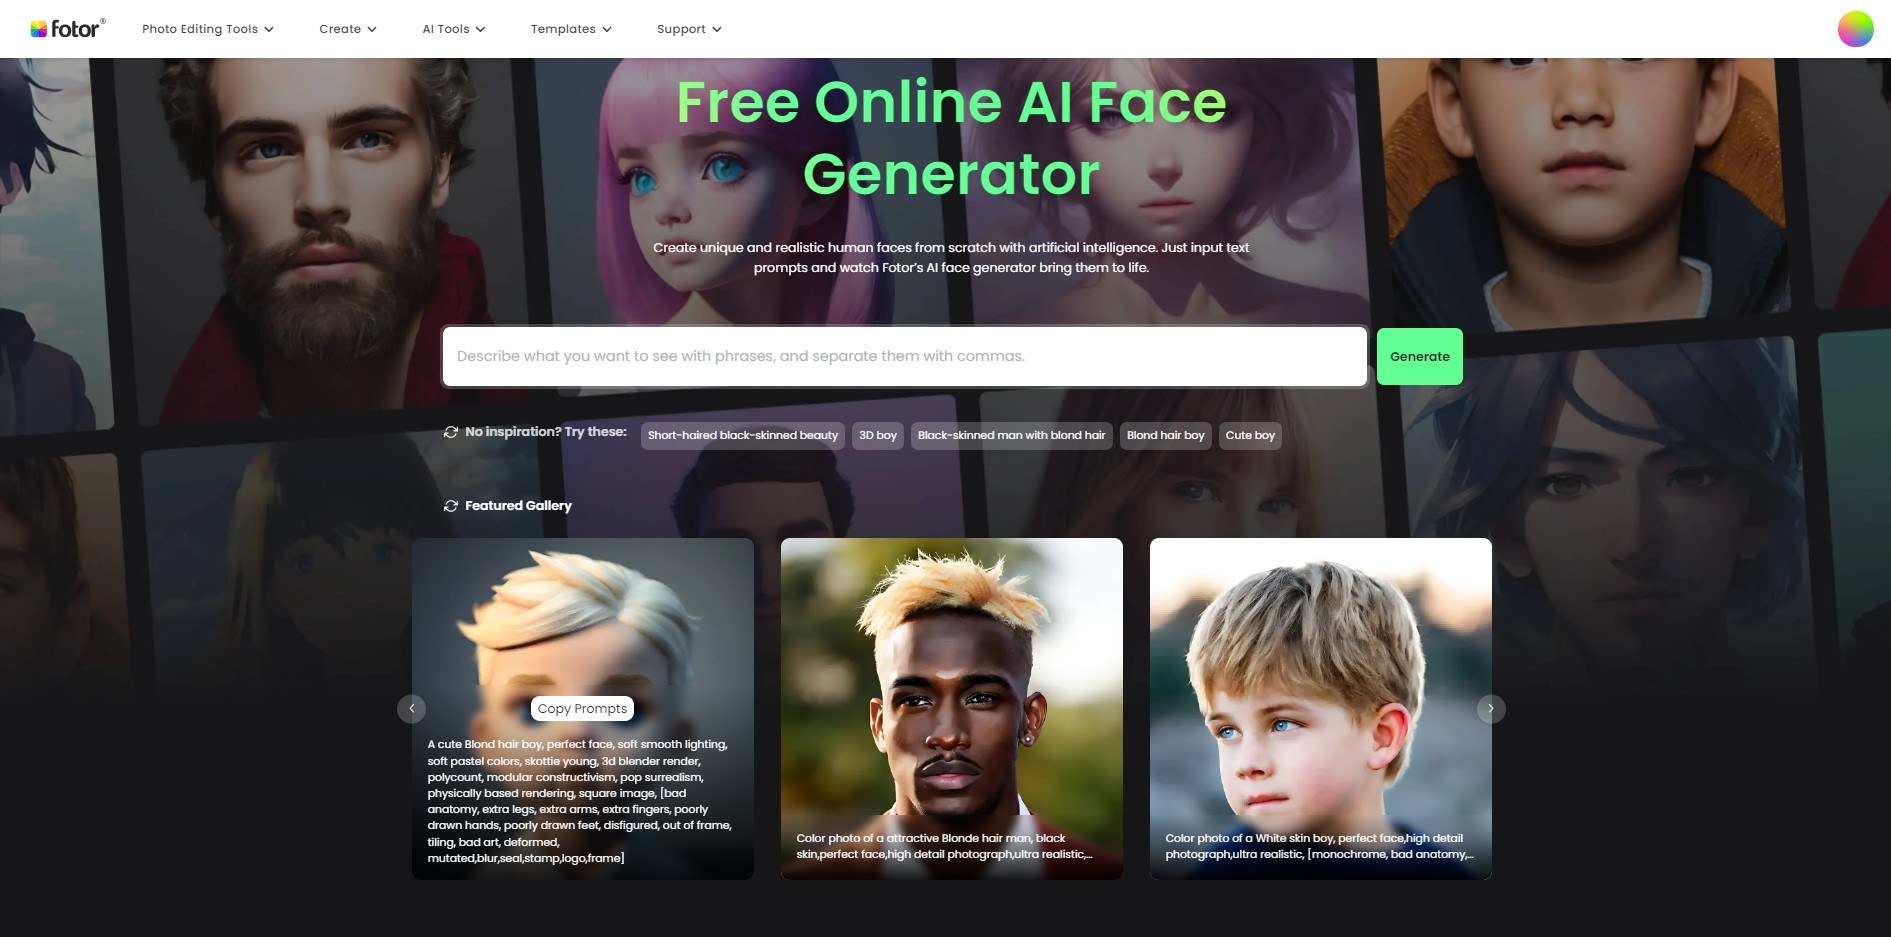 fotor ai face generator home page